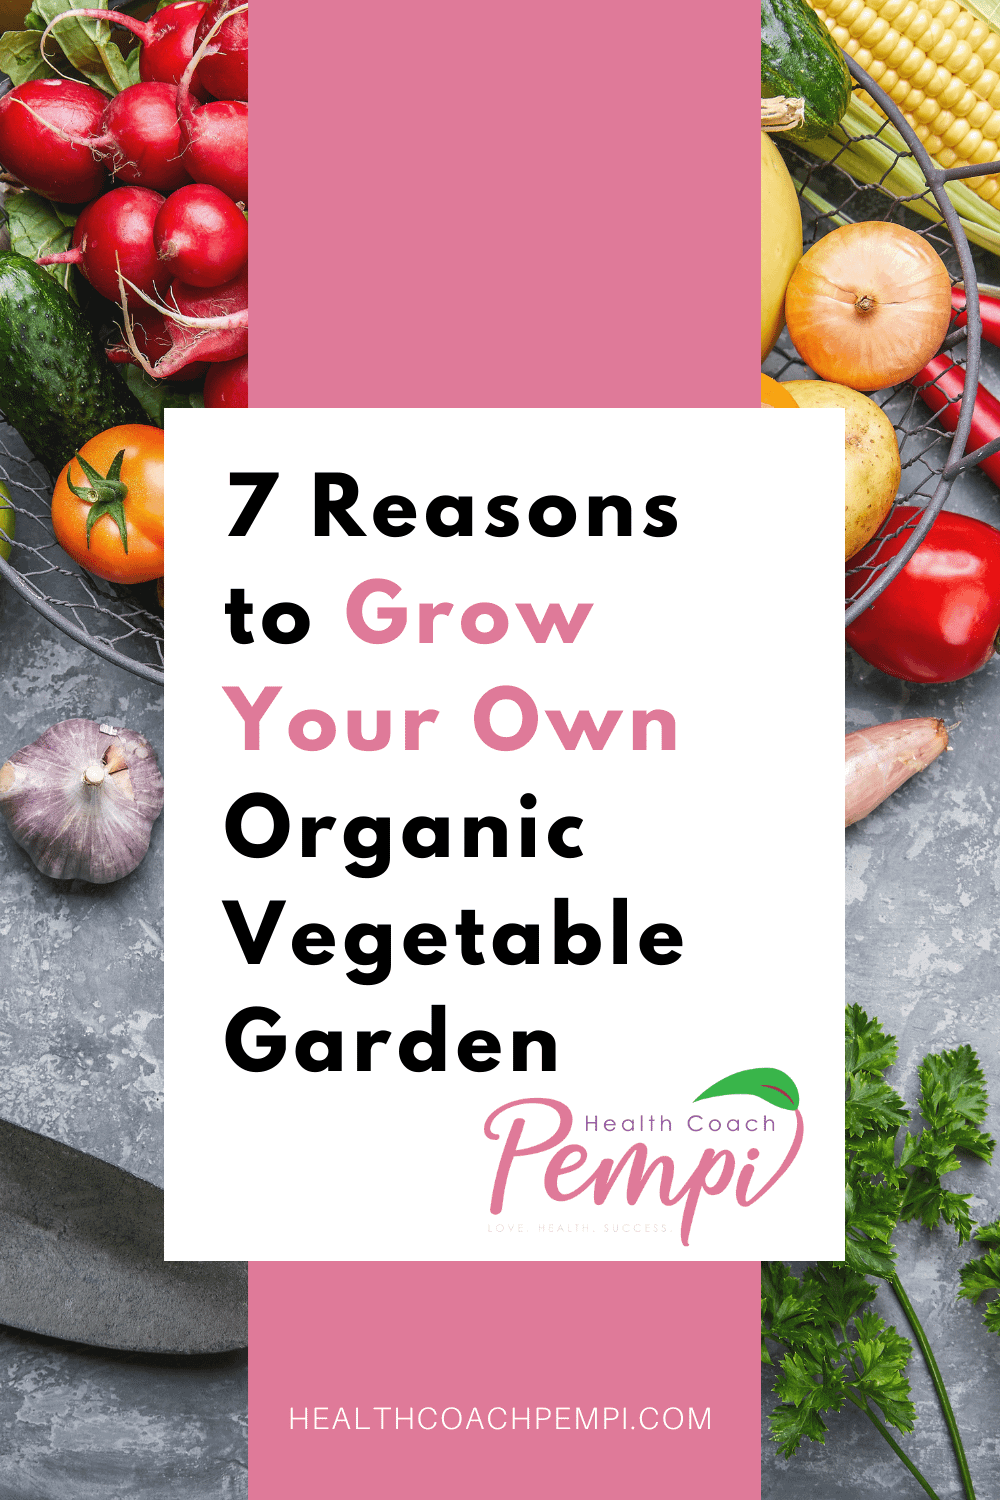 7 Reasons to Grow Your Own Organic Vegetable Garden